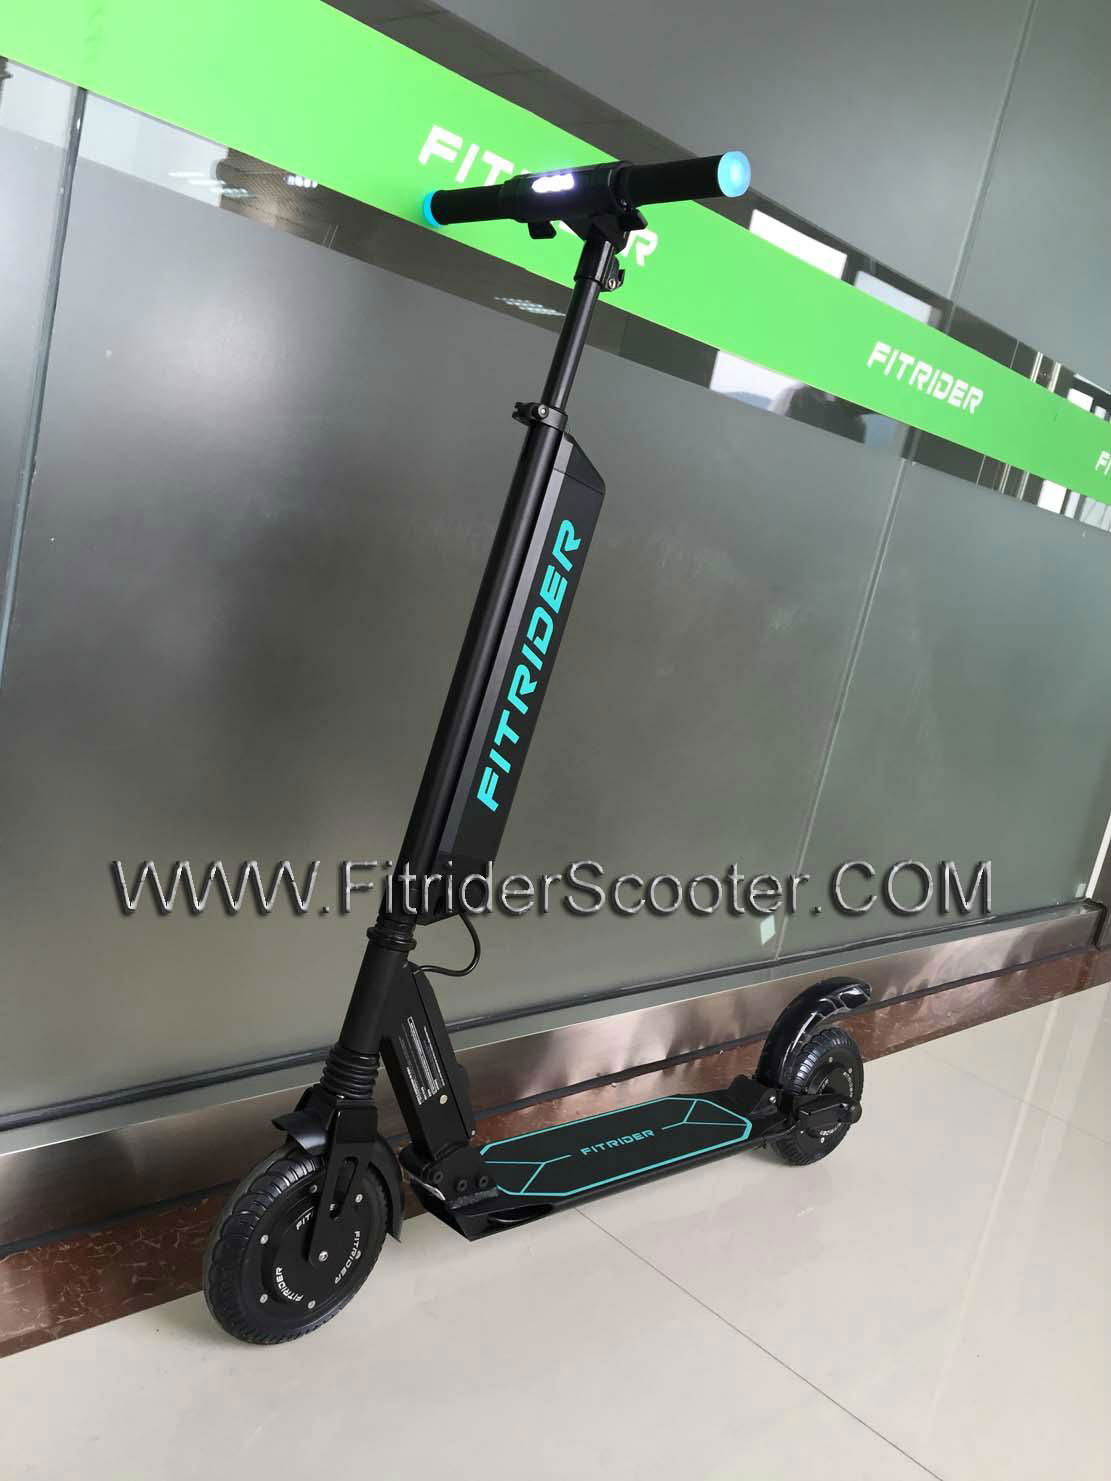 New Electric Scooter Fitrider T1S F1 Model 8 inch 5